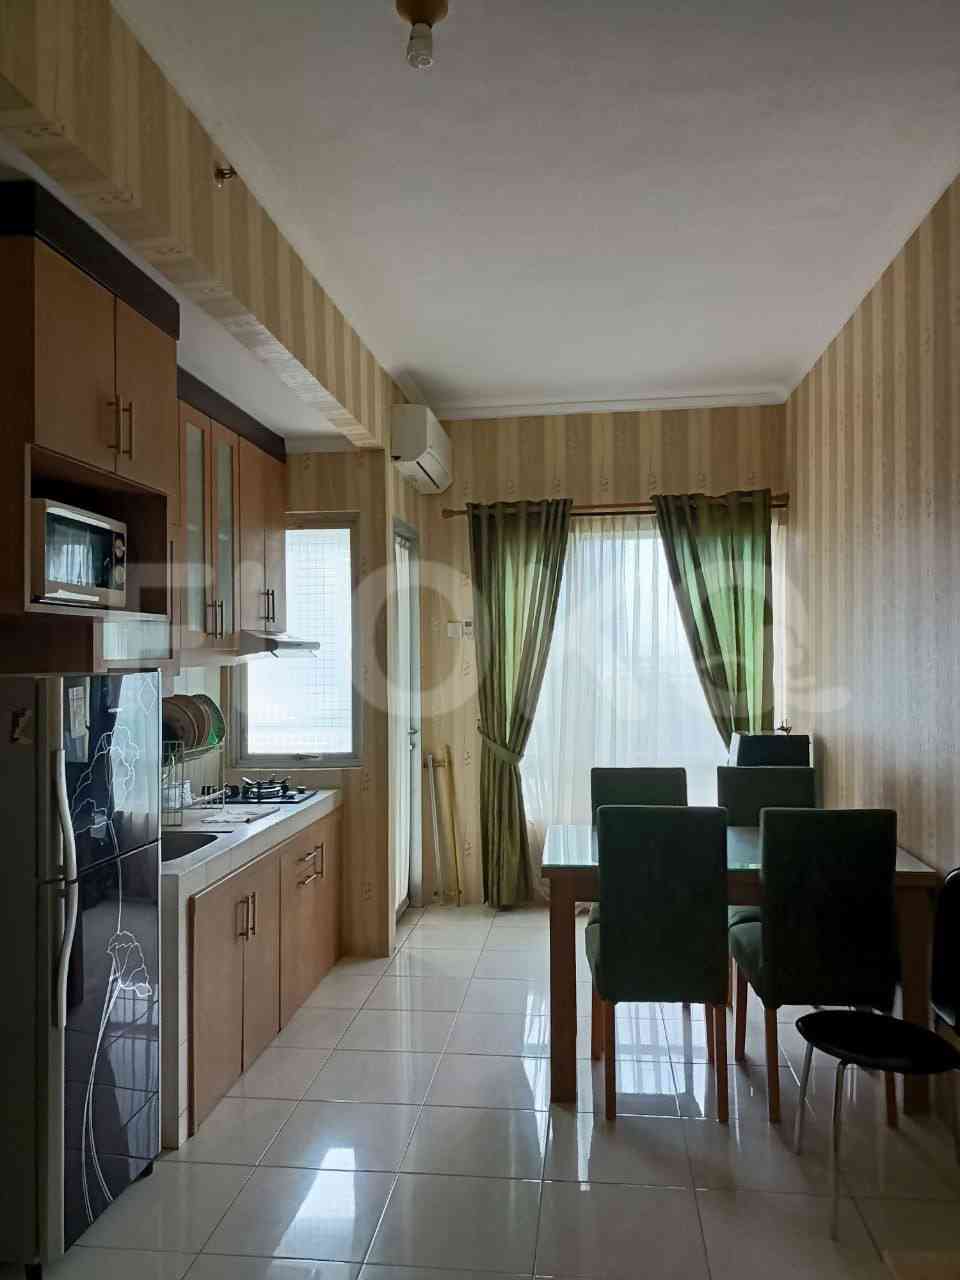 2 Bedroom on 7th Floor for Rent in Sudirman Park Apartment - ftad1f 4